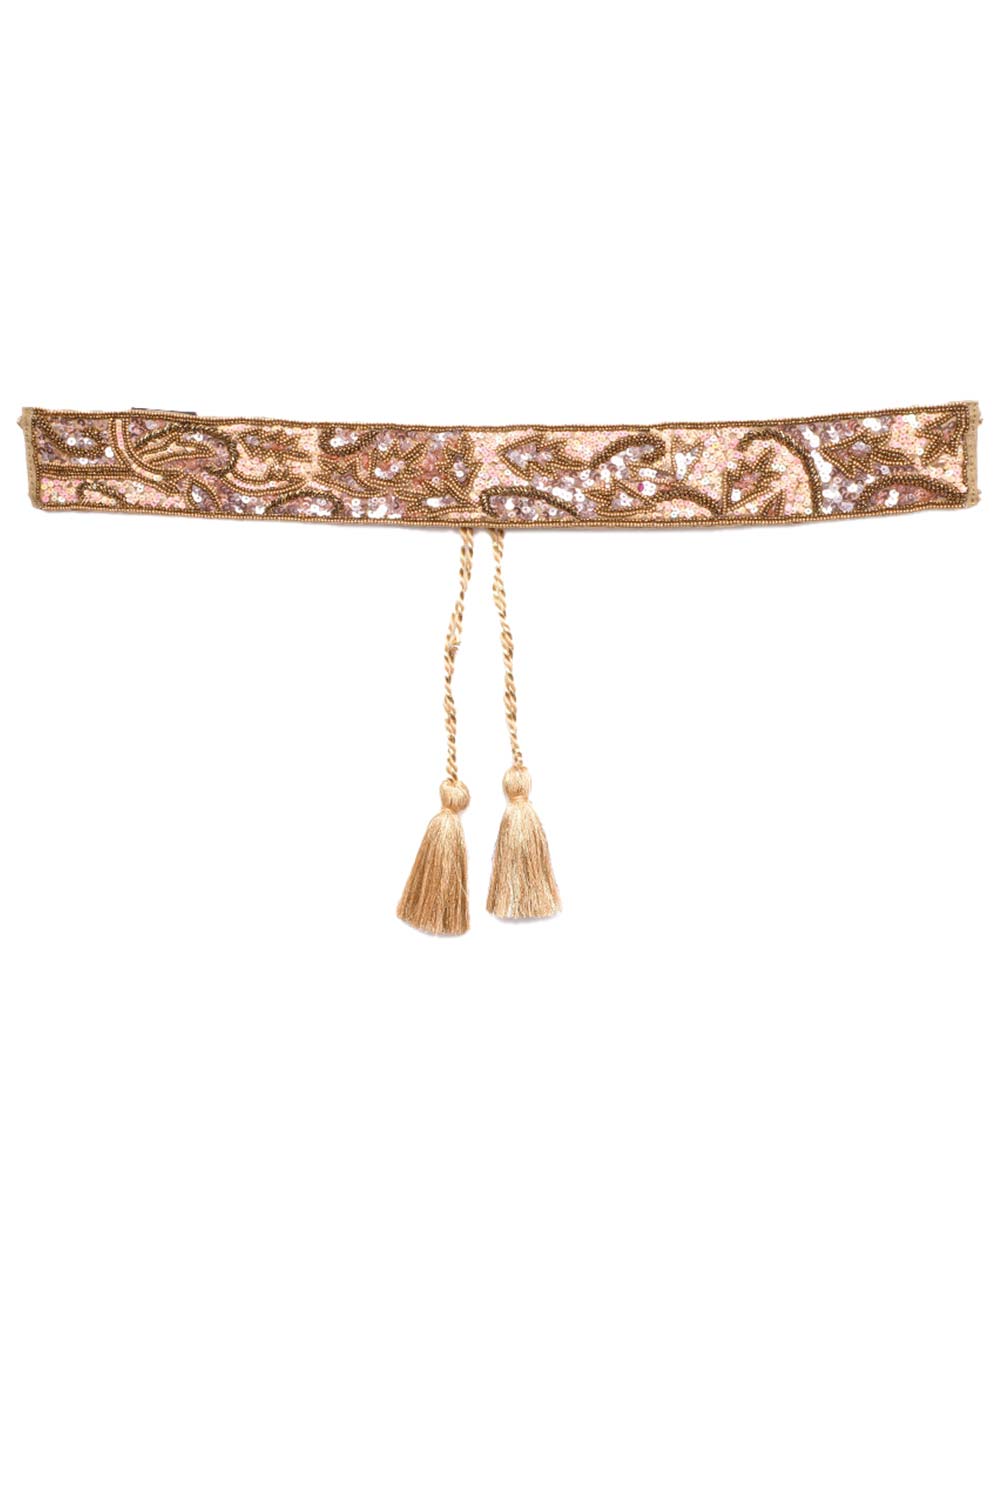 Buy Abstract Sequined Saree Belt in Antique Gold & Multi Online - One Minute Saree